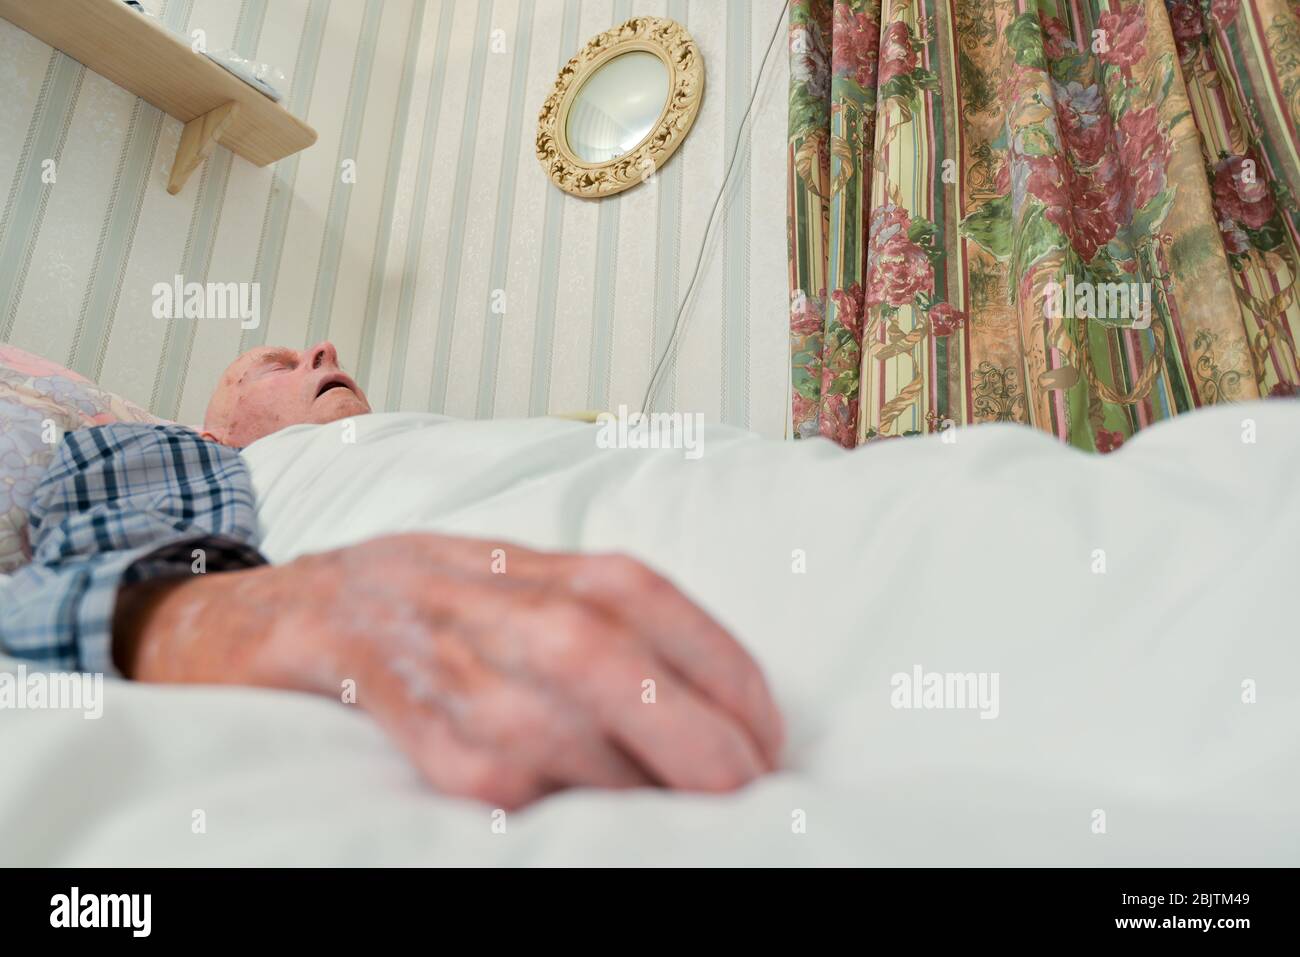 Covered with a duvet,wearing pyjamas in a hospital bed downstairs at his home. Stock Photo